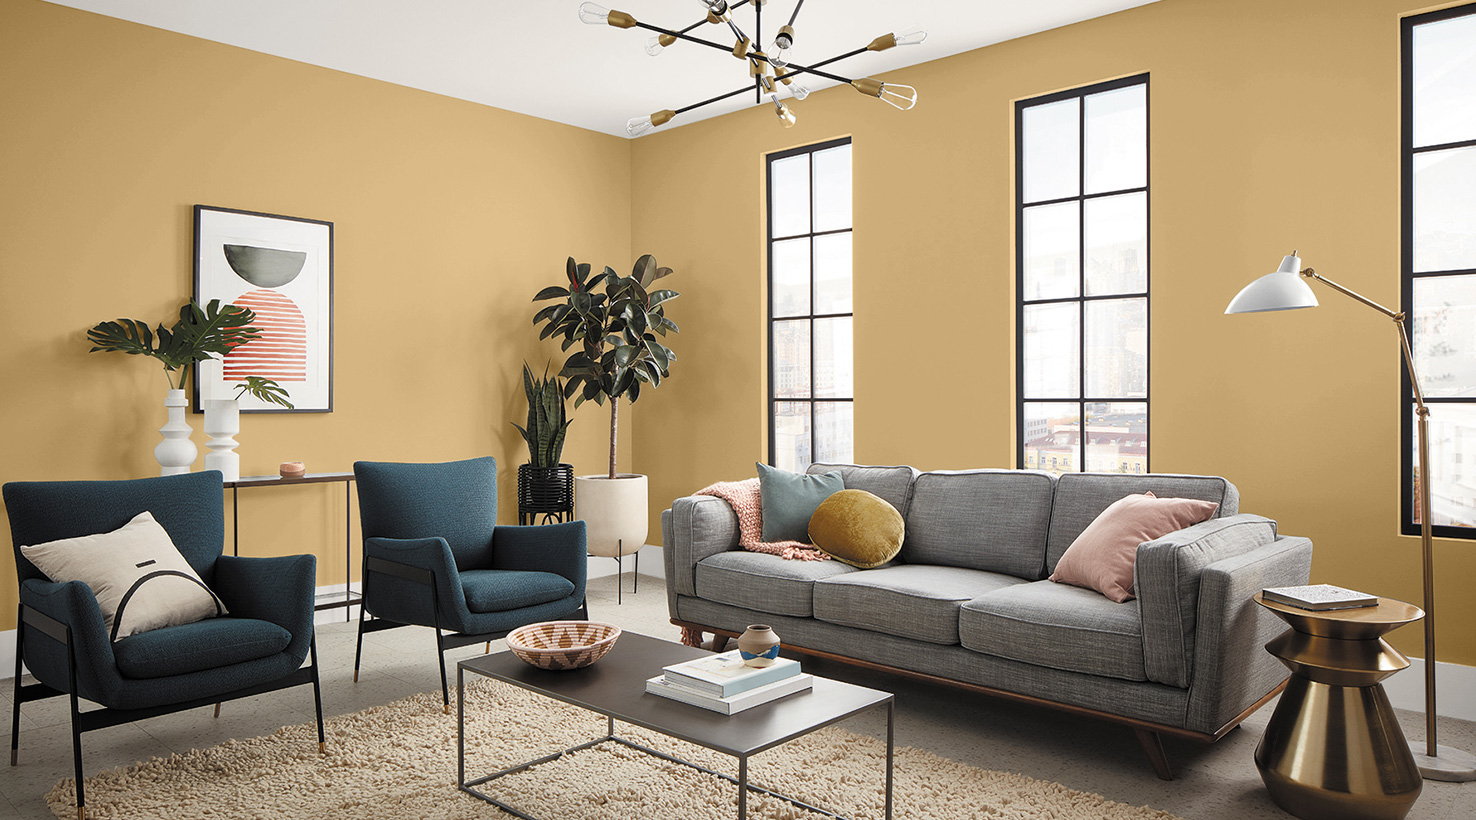 New Residential Colormix Forecast 2021 - Encounter | Sherwin-Williams